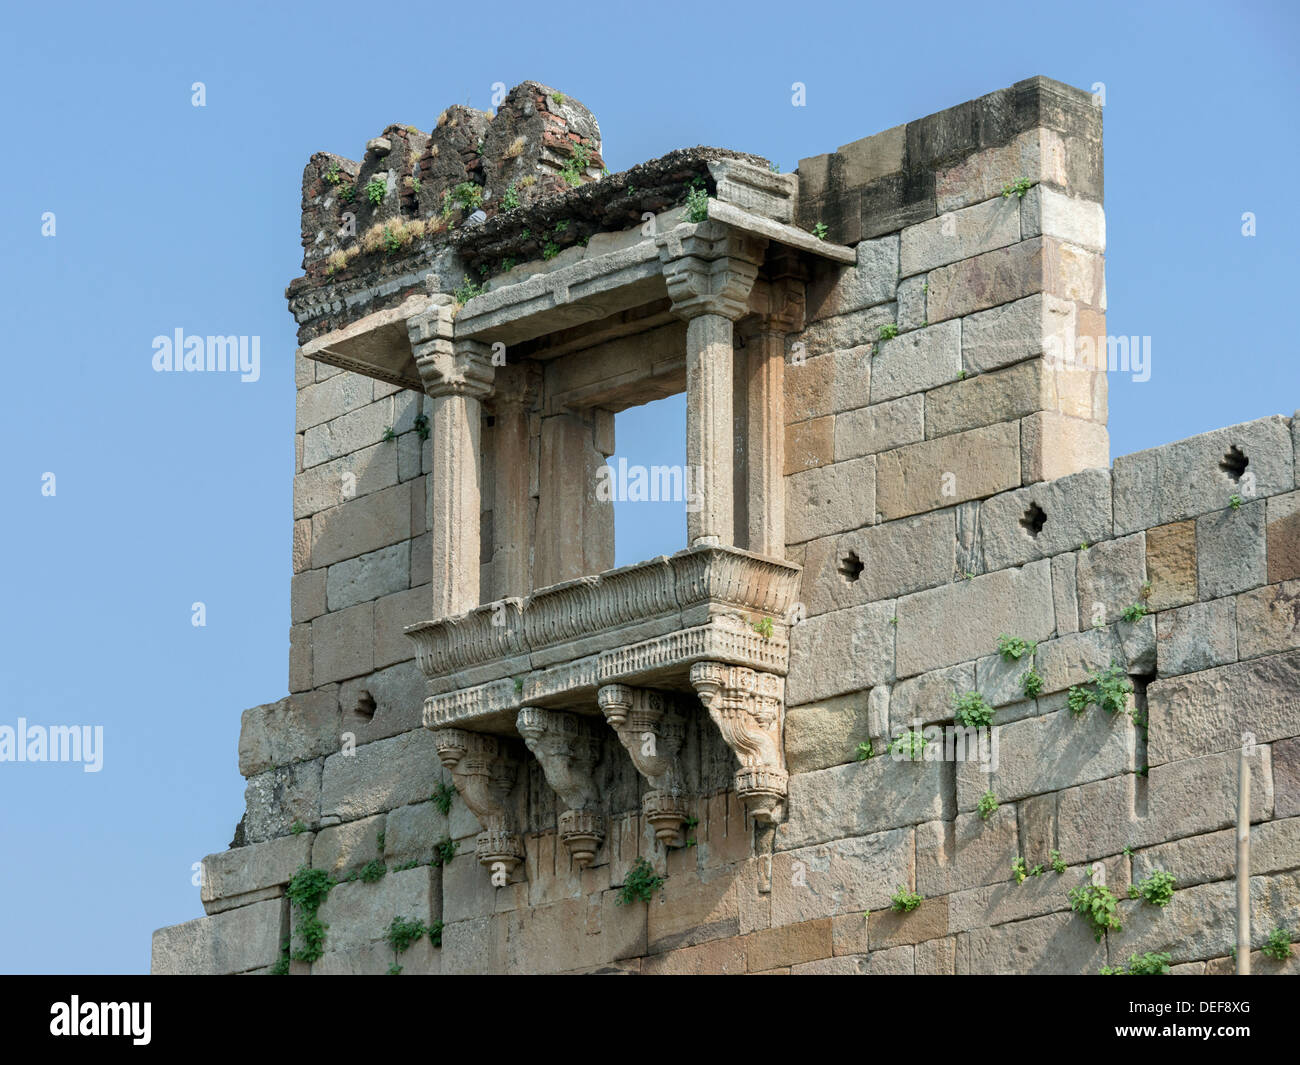 Angled view of jharokha (window/balcony) in the fortress wall at the Champaner Archaeological site, Gujurat State, India Stock Photo